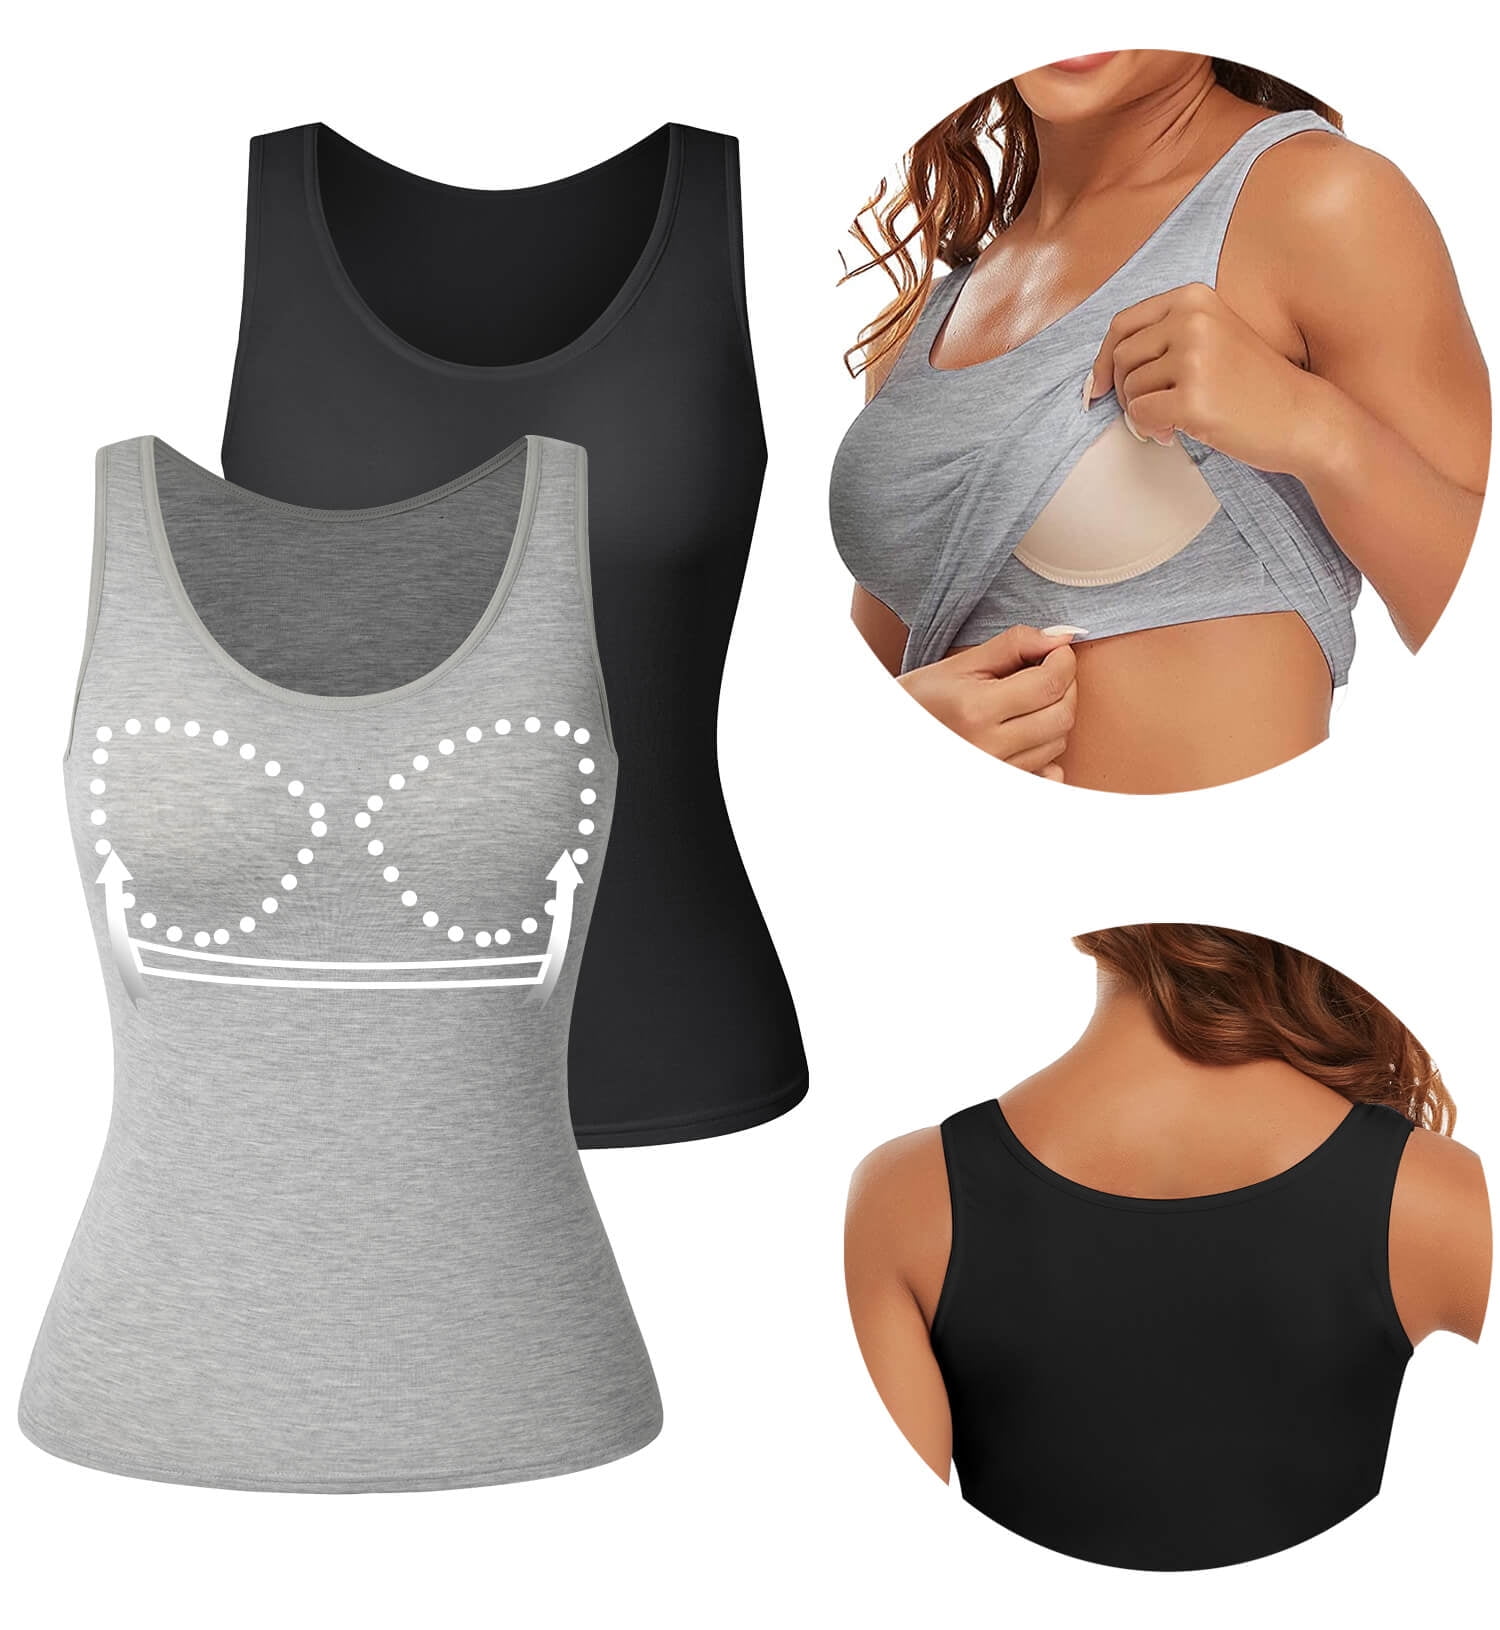 Women Padded Soft Casual Bra Tank Top Women Spaghetti Cami Top Vest Female  Camisole With Built In Bra(gray Xl)